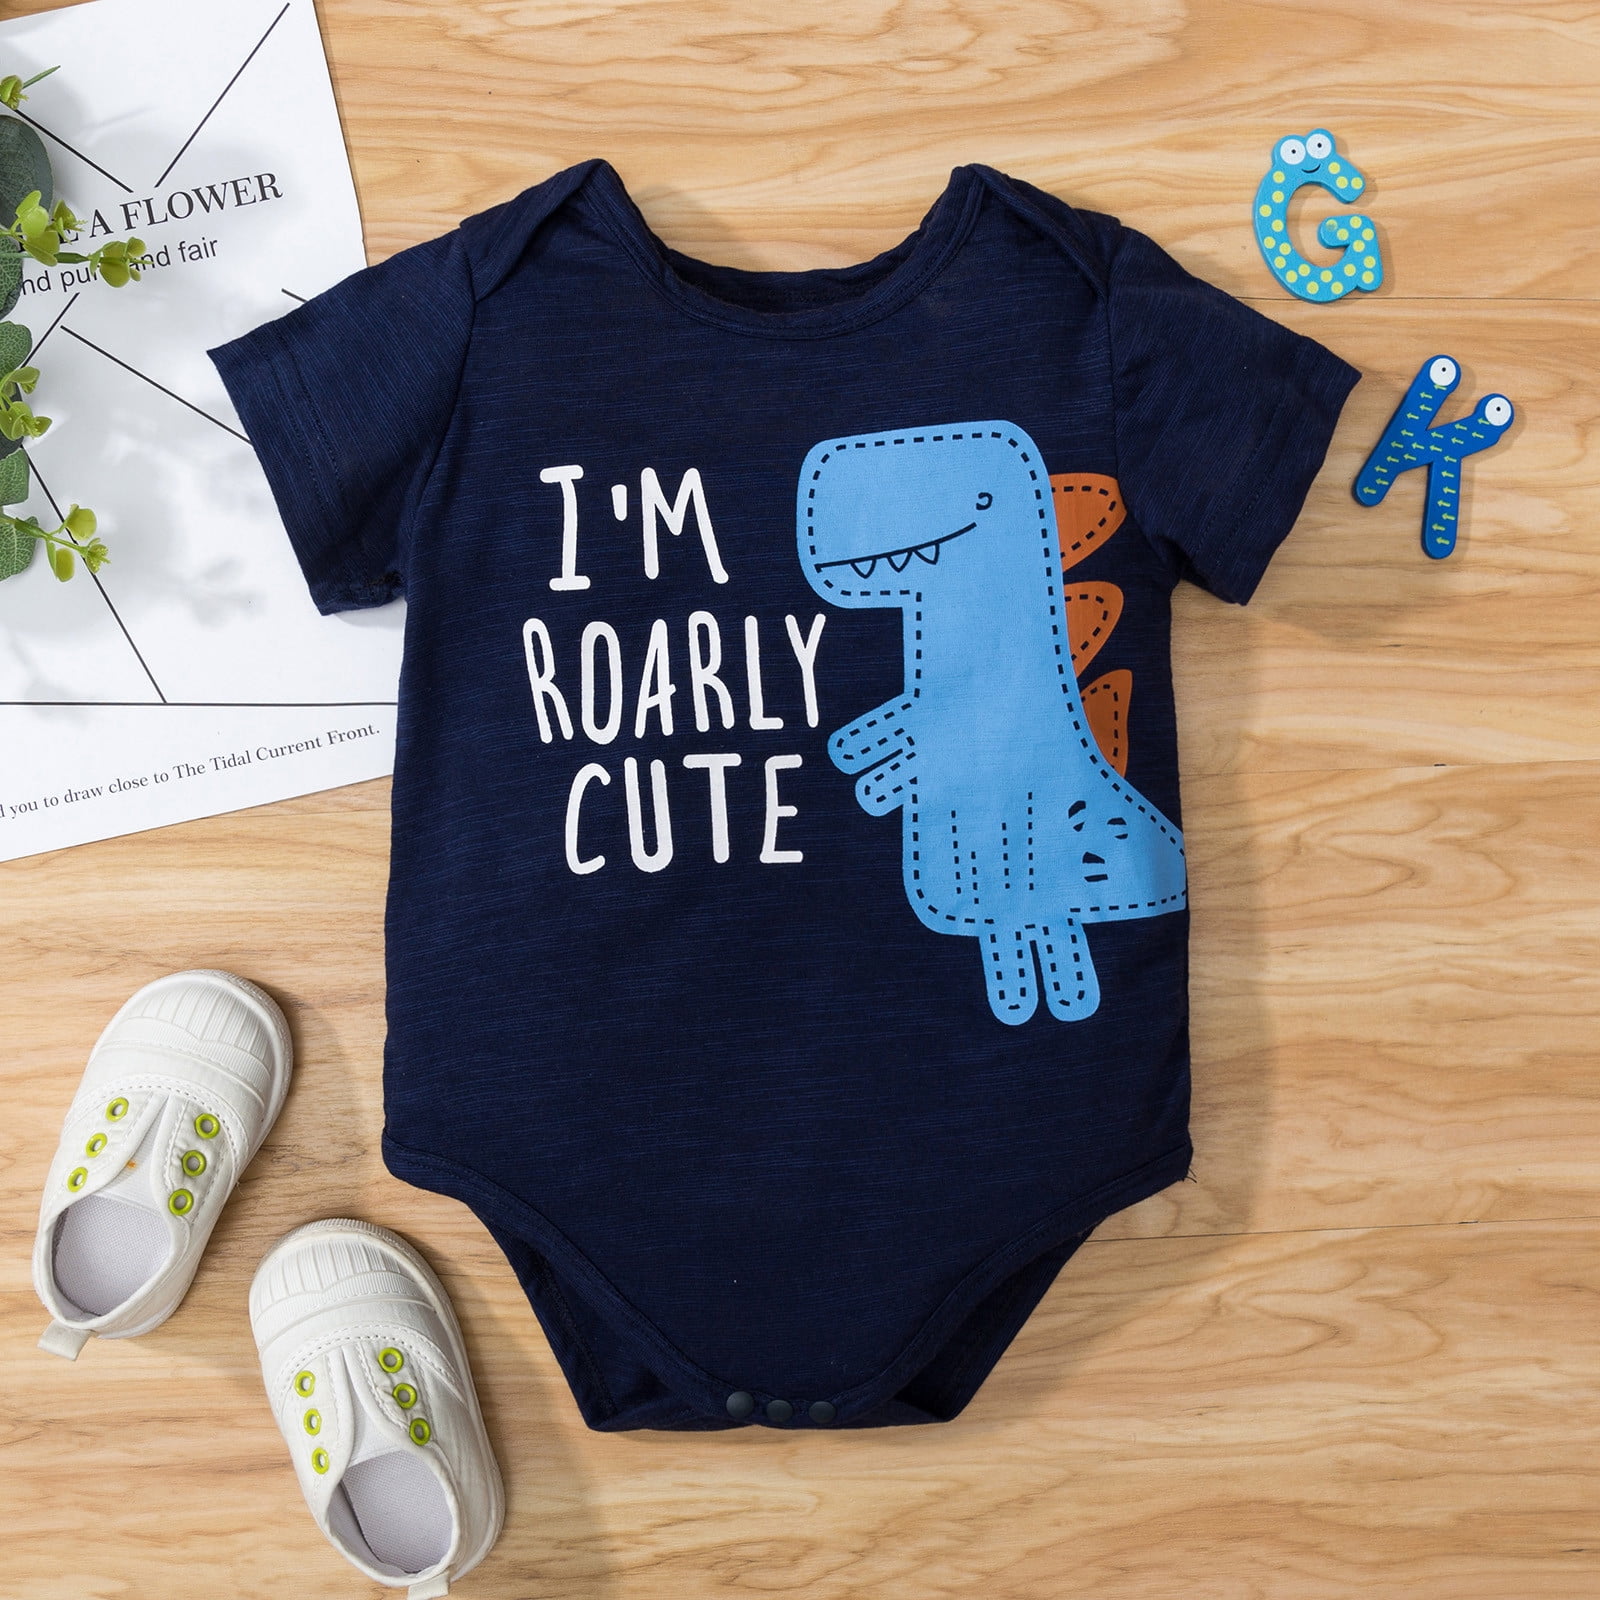 BABY ONE PIECE ROMPER printed with FUTURE TRADIE on a baby romper 